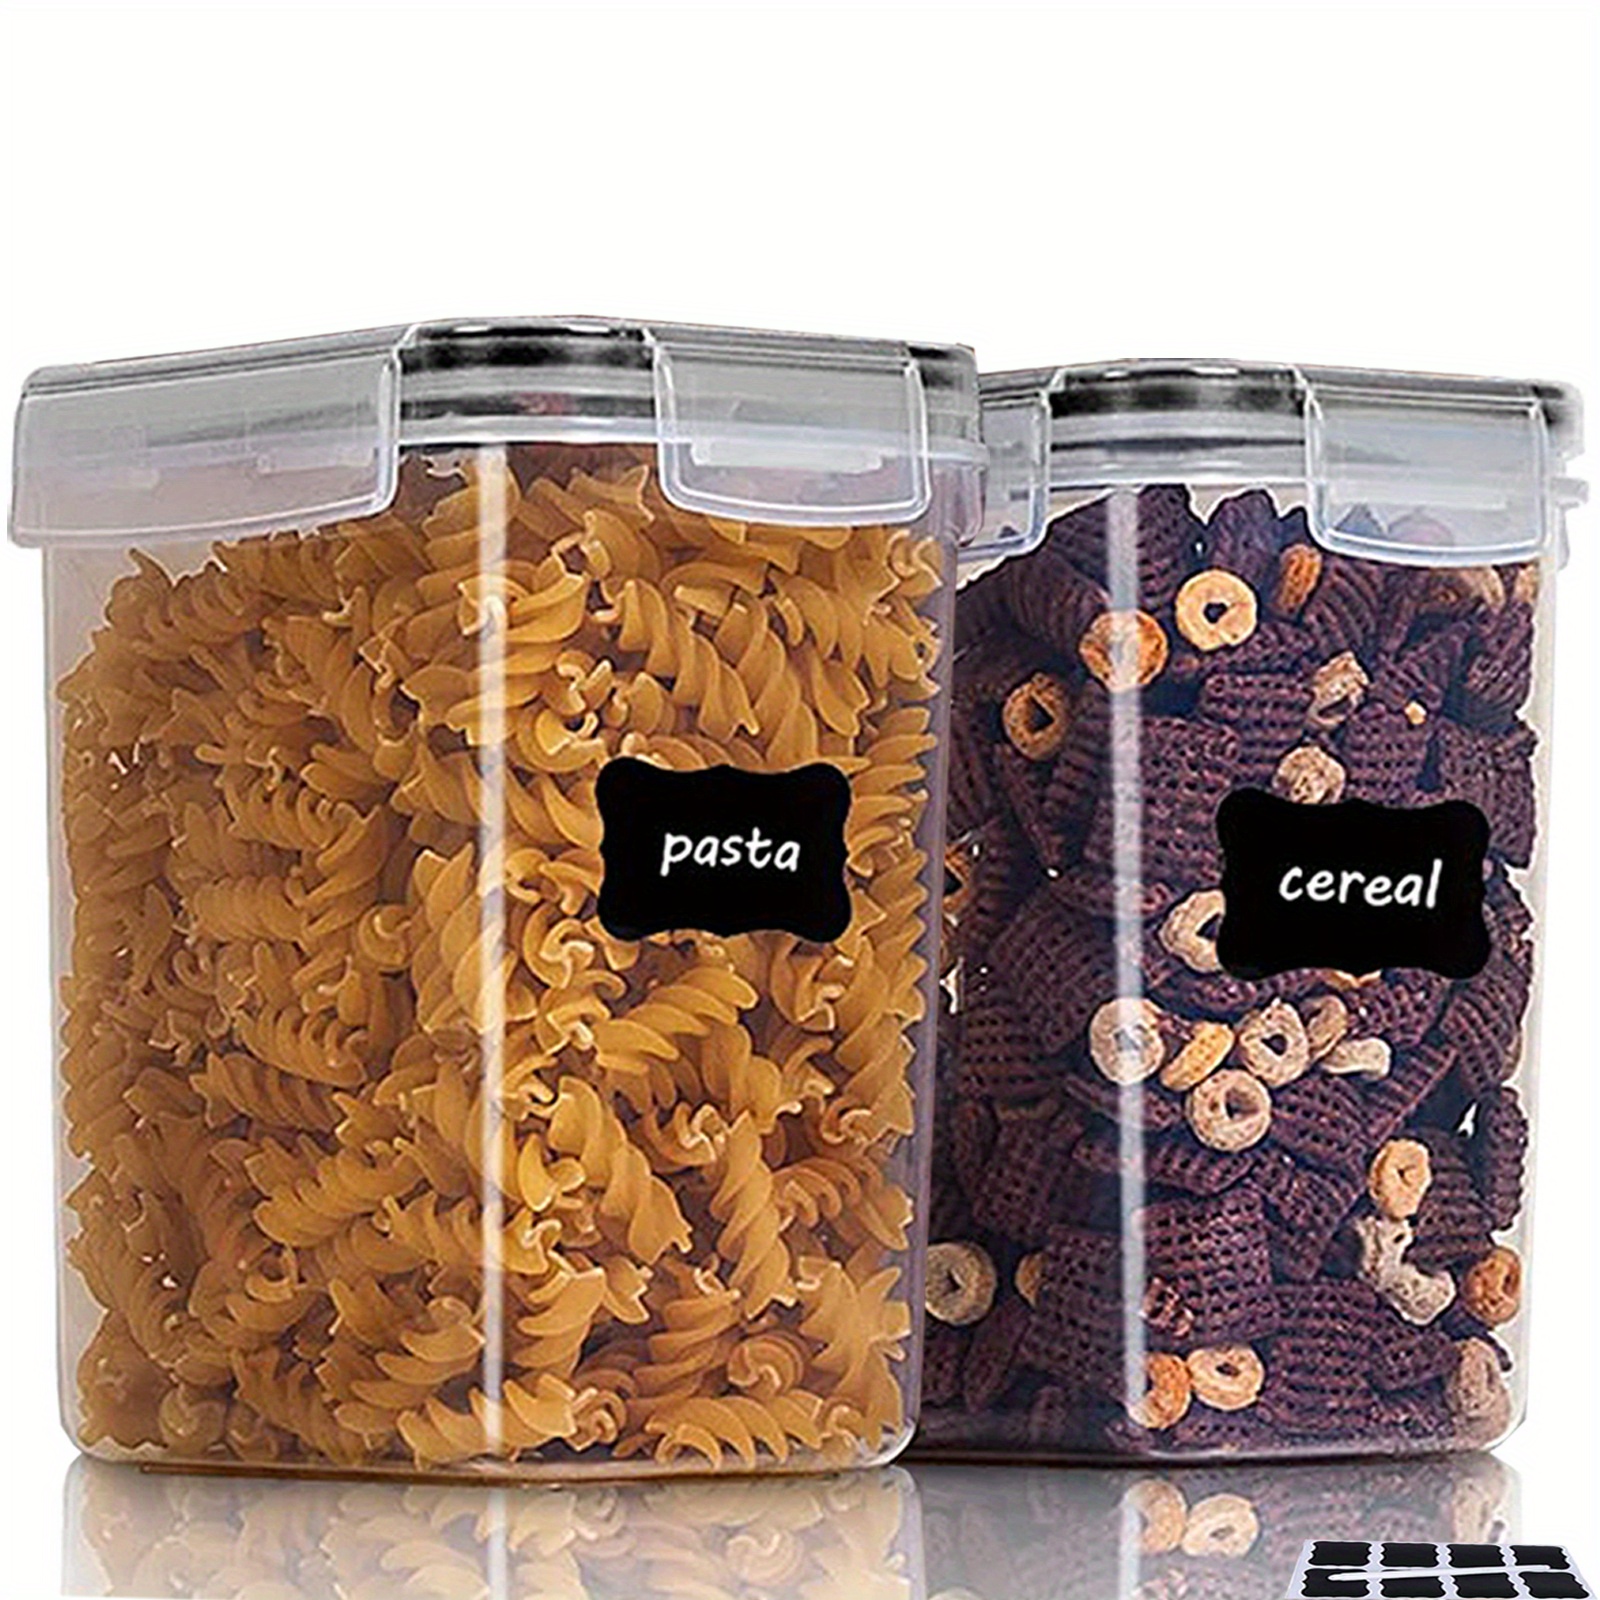 Airtight Food Storage Containers Plastic Bpa Free Pp Material